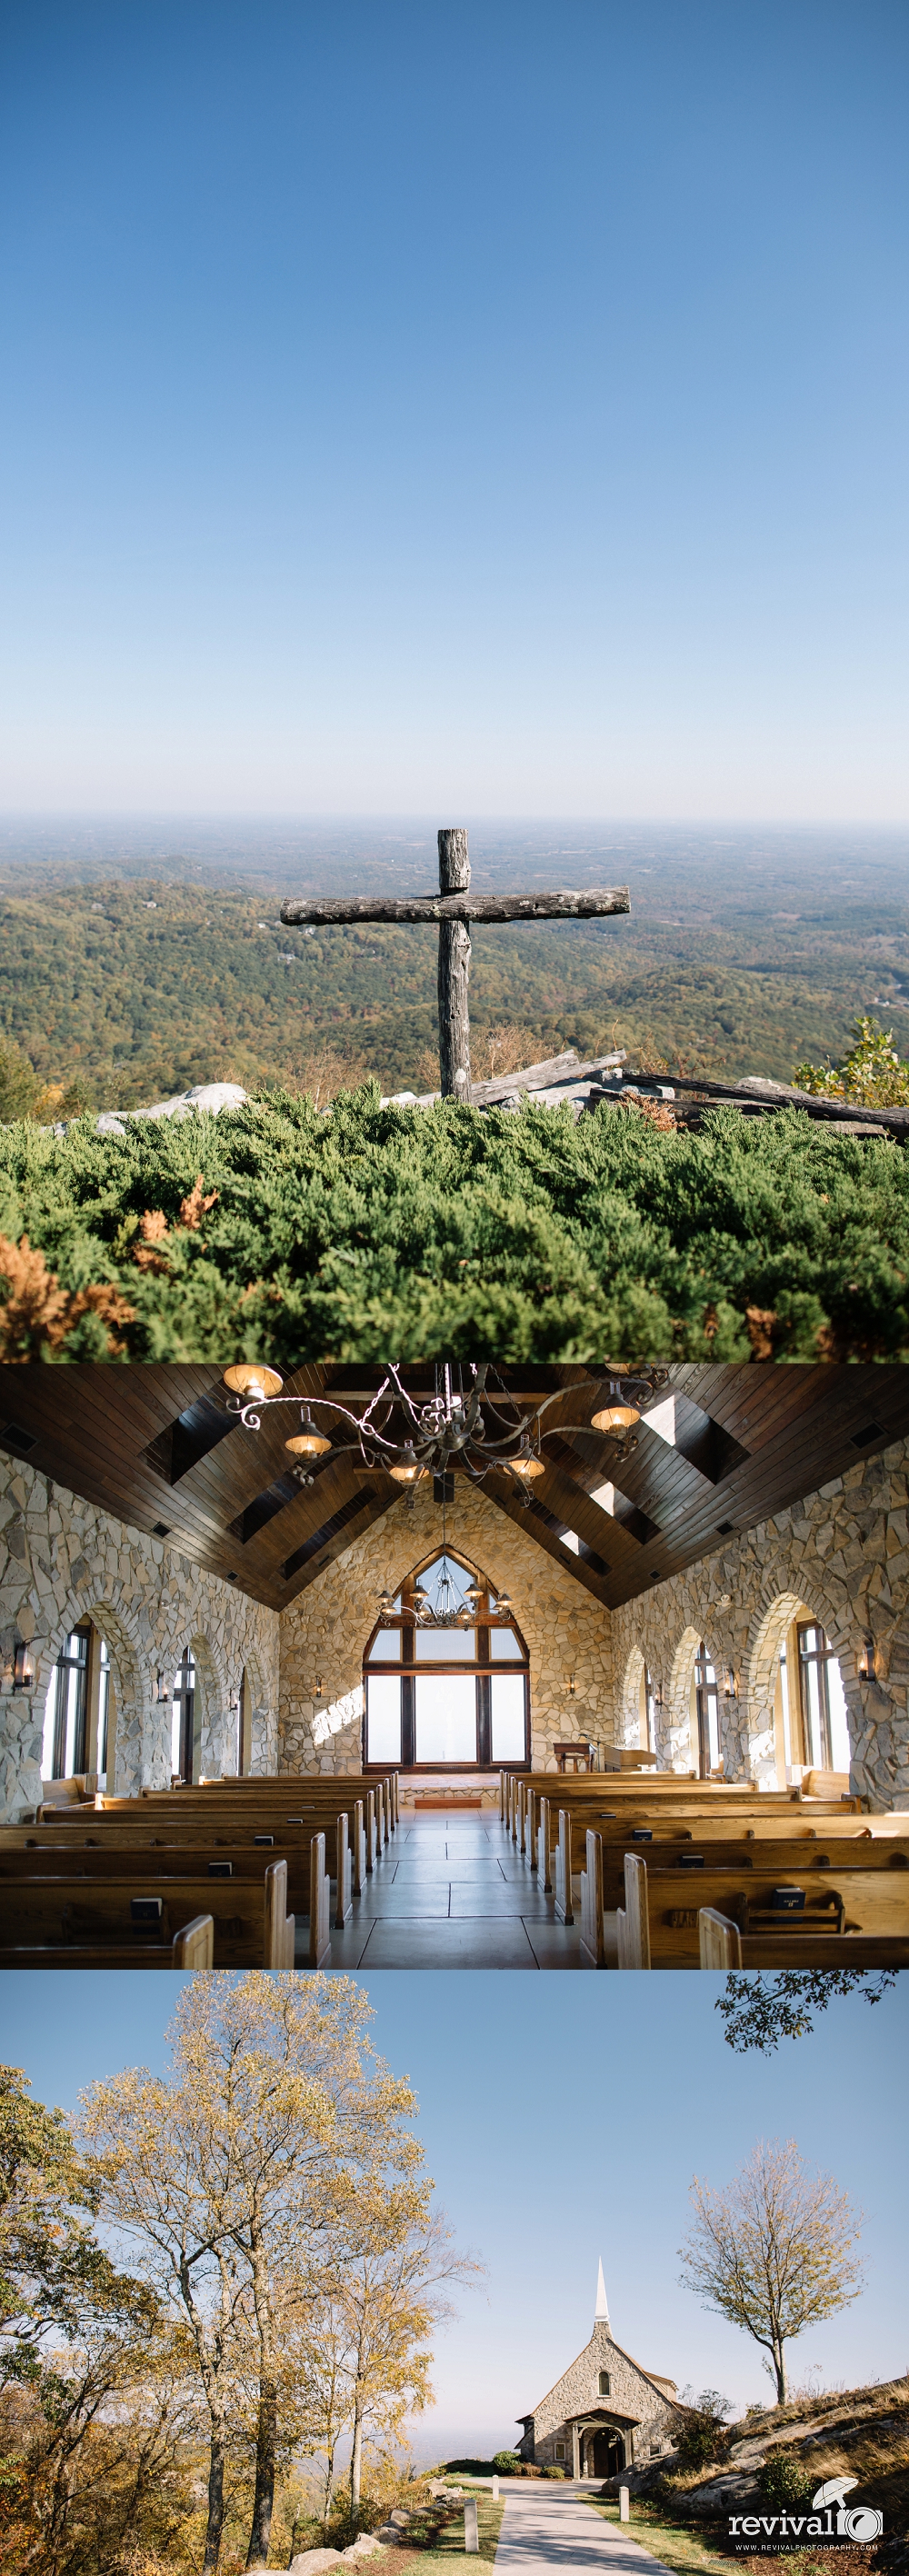 Faith + Howard's Fall Destination Wedding at The Cliffs at Glassy Mountaintop Chapel Photos by Revival Photography www.revivalphotography.com